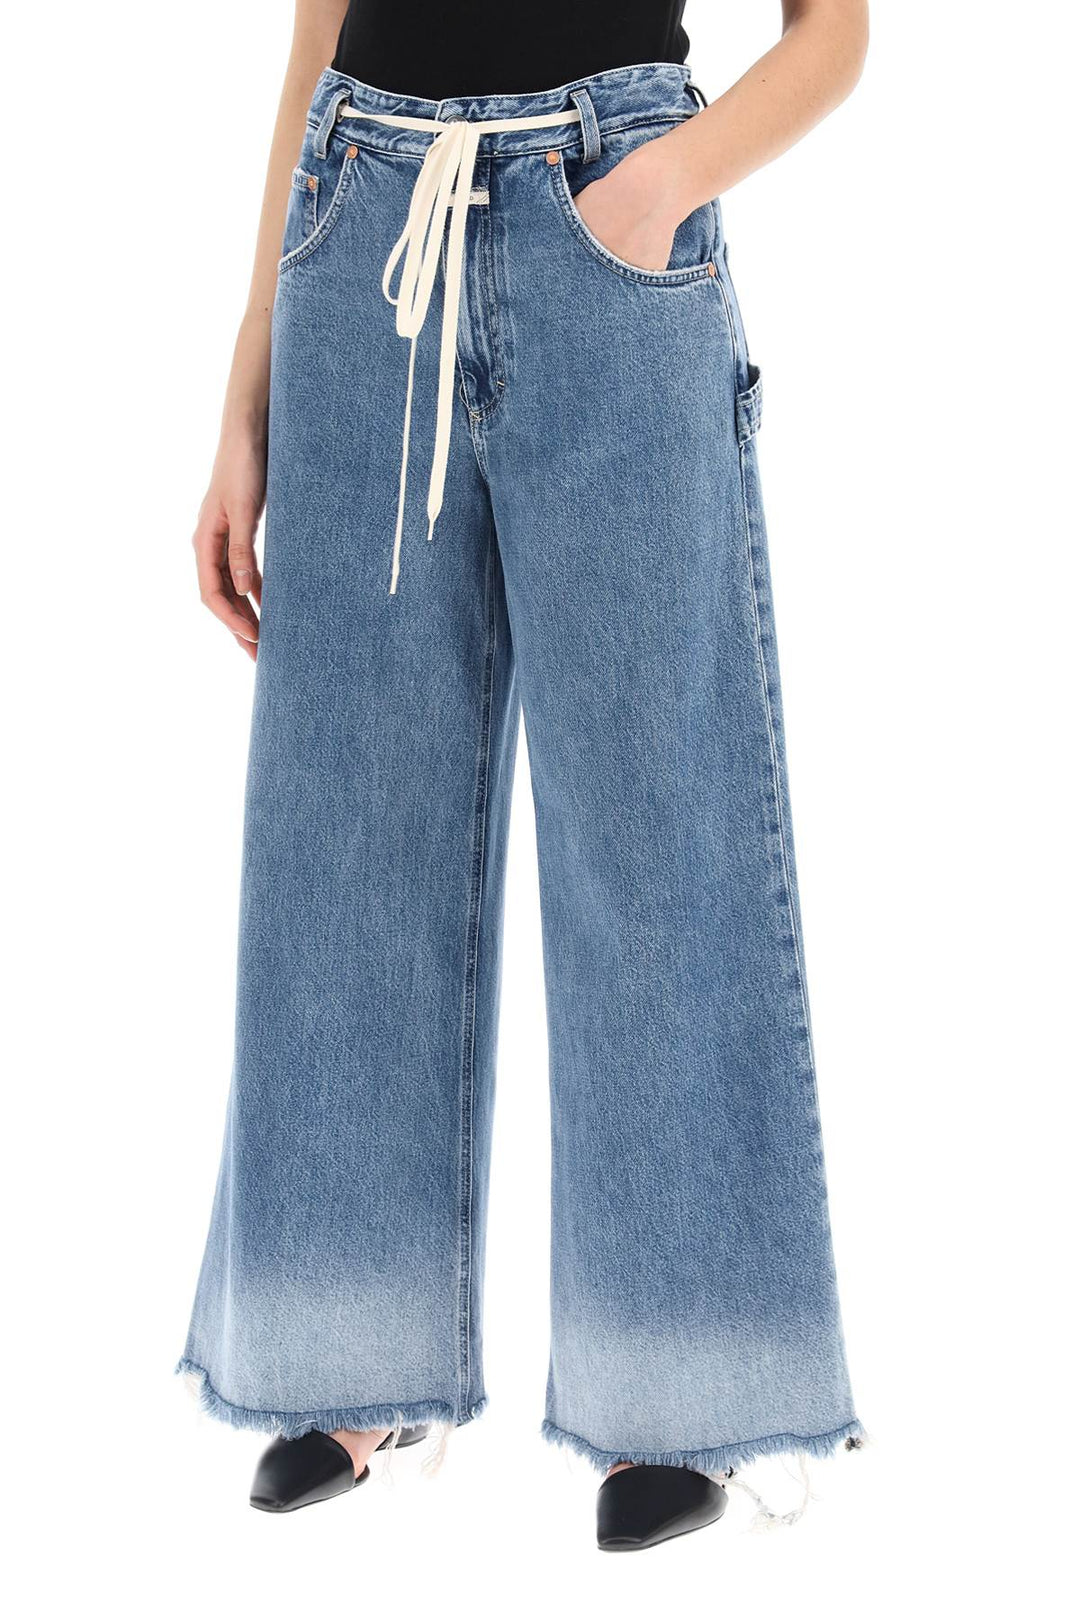 Closed Flare Morus Jeans With Distressed Details   Blue